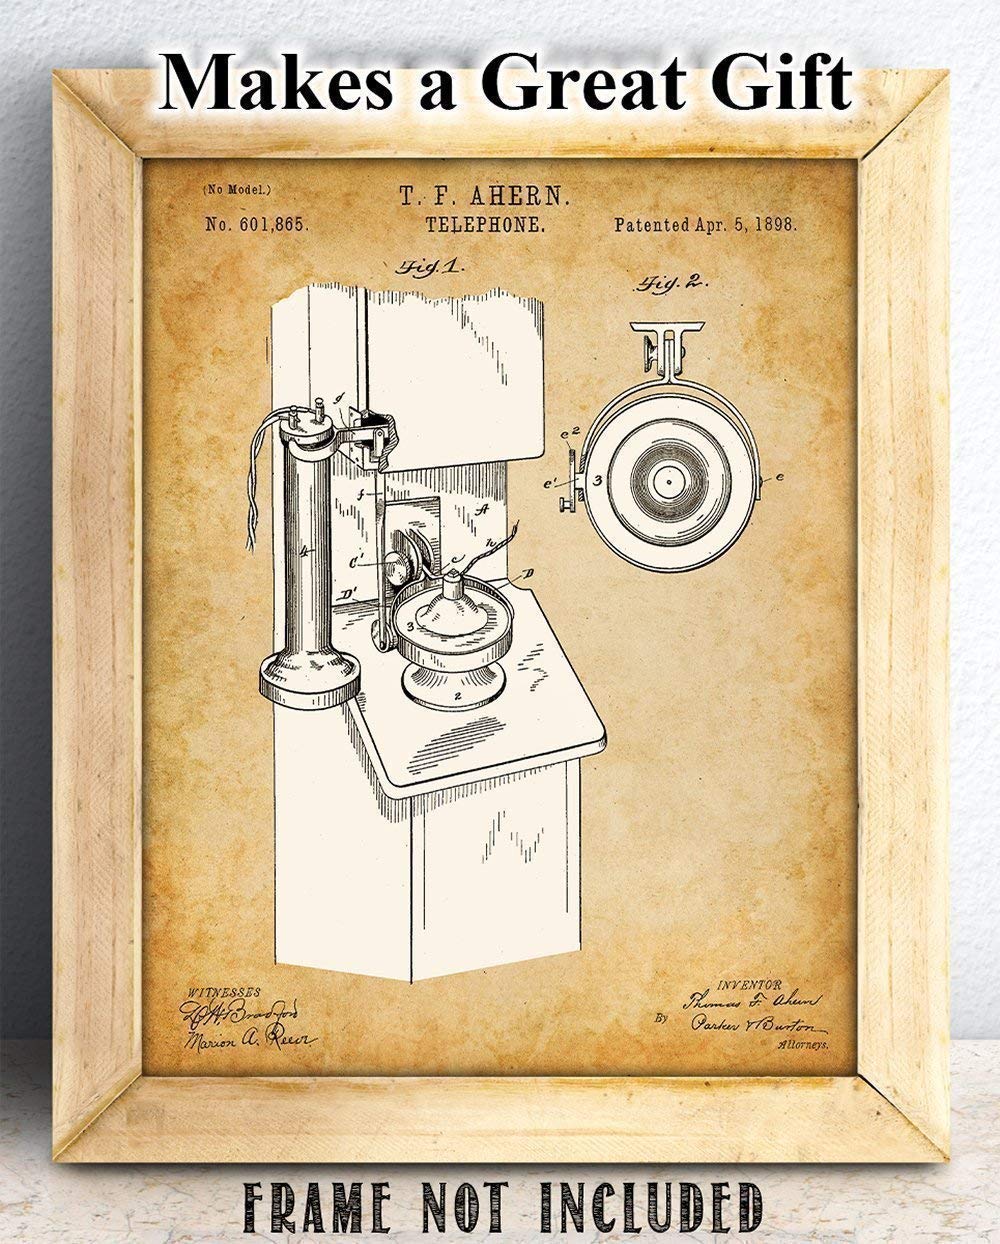 Telephone - 11x14 Unframed Patent Print - Makes a Great Home or Office Decor and Gift Under $15 for Inventors